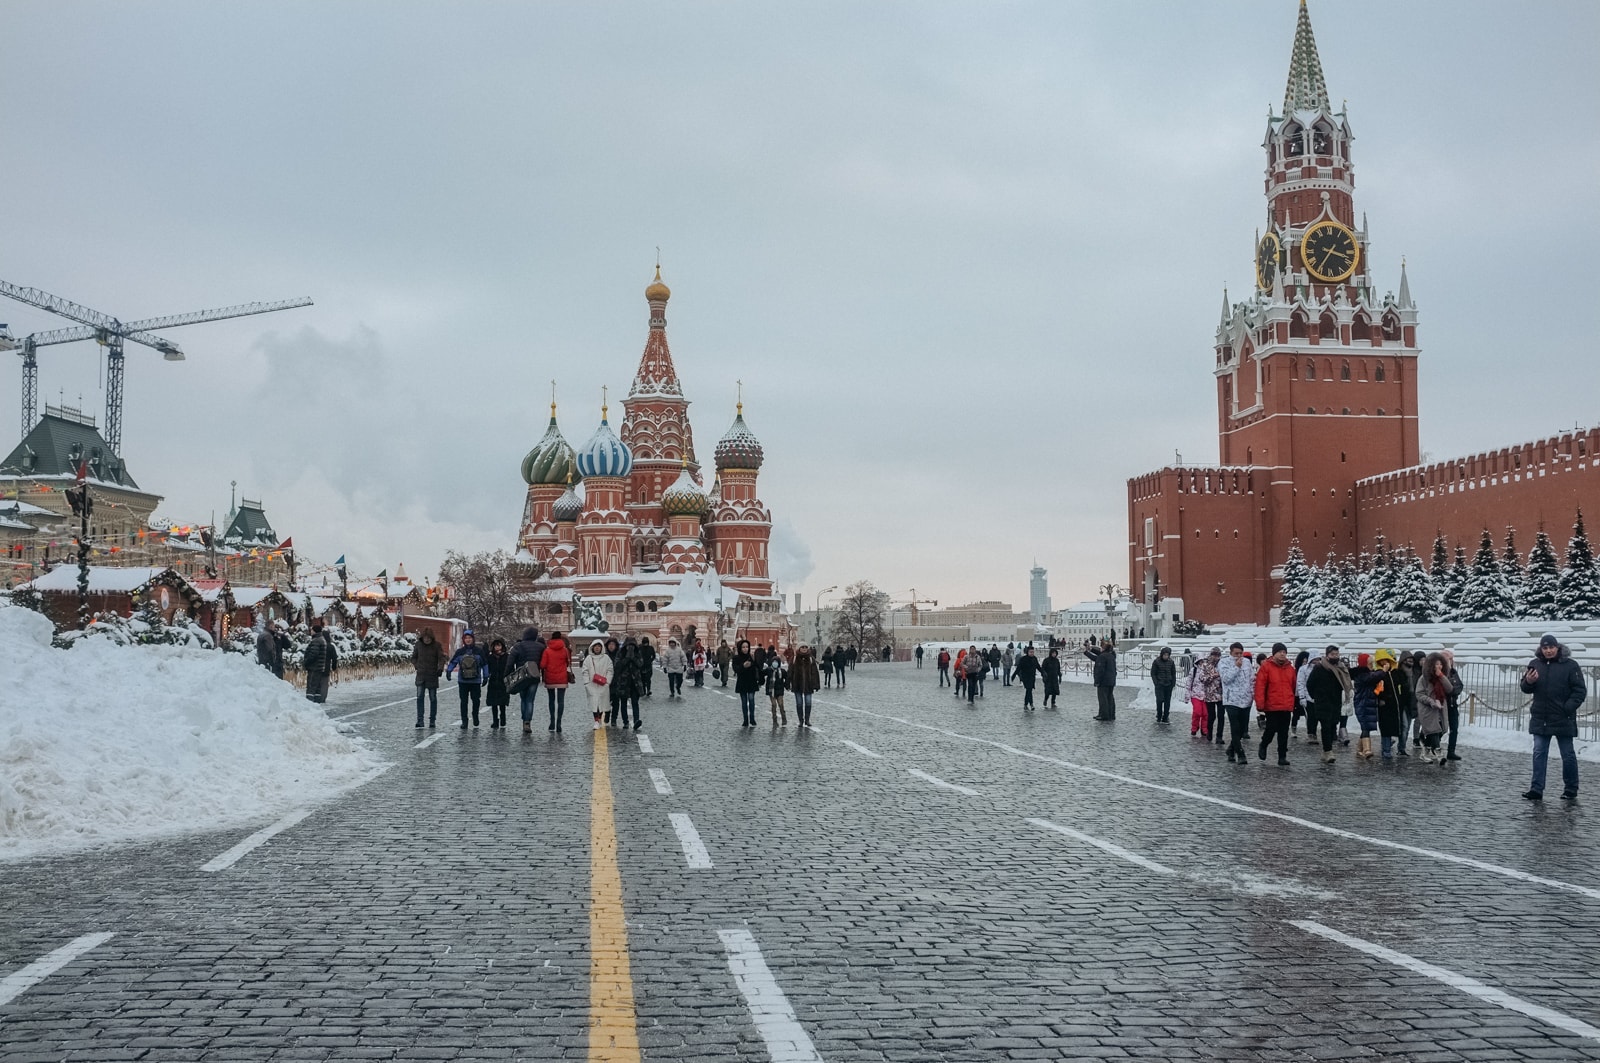 MoscowTour Packages - Book honeymoon ,family,adventure tour packages to Moscow|Travel Knits